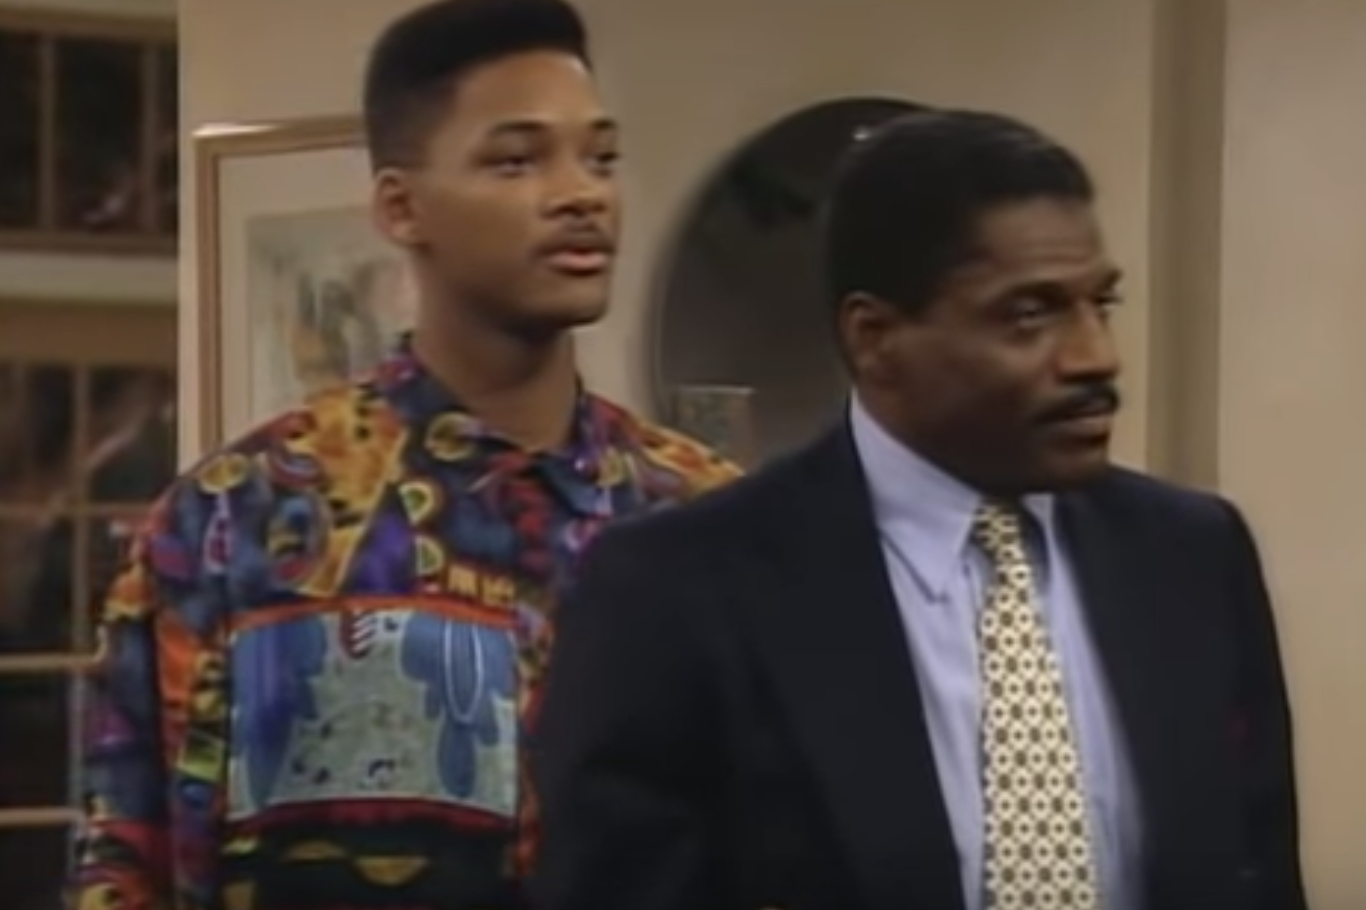 John Wesley as Dr Hoover next to Will Smith in The Fresh Prince of Bel-Air.